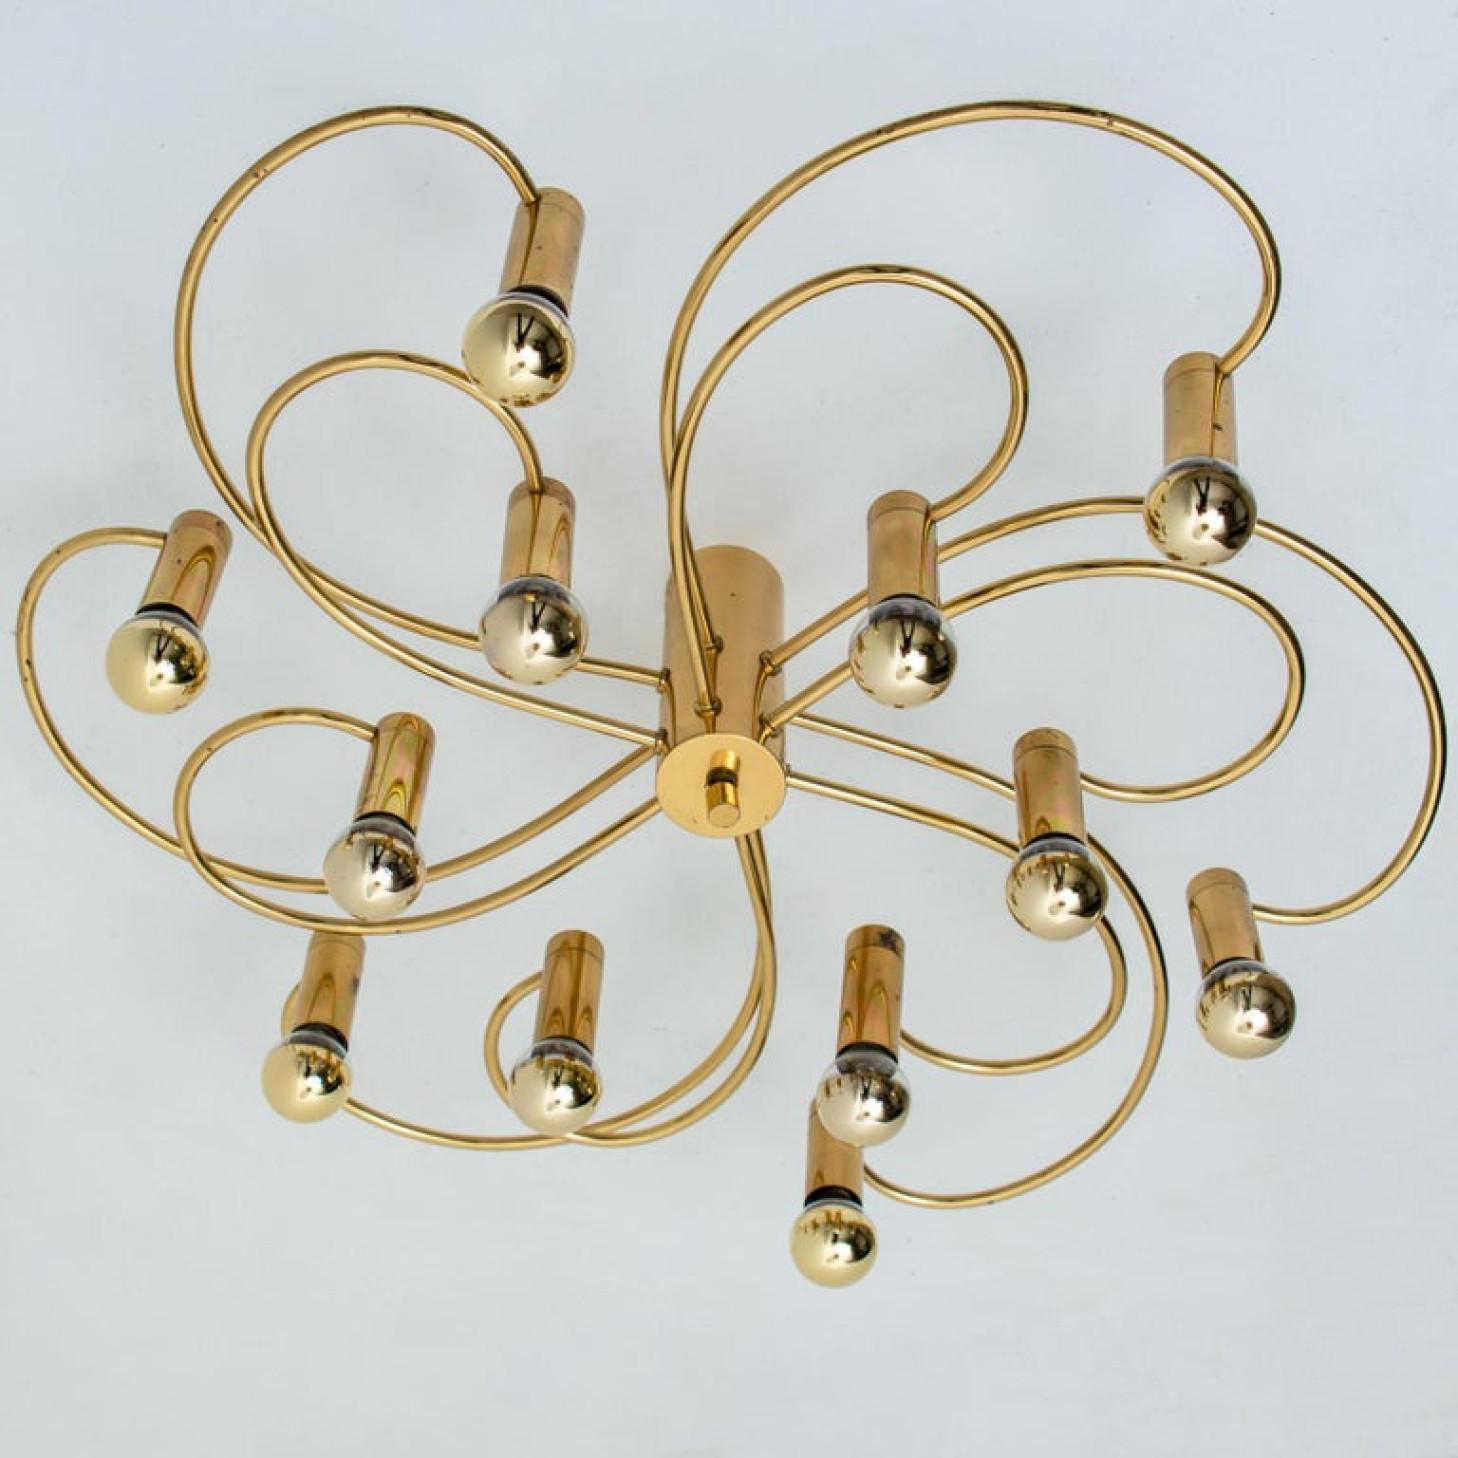 1 of the 2 Leola Sculptural Brass 13-Light Ceiling or Wall Flush Mount, 1970s For Sale 7